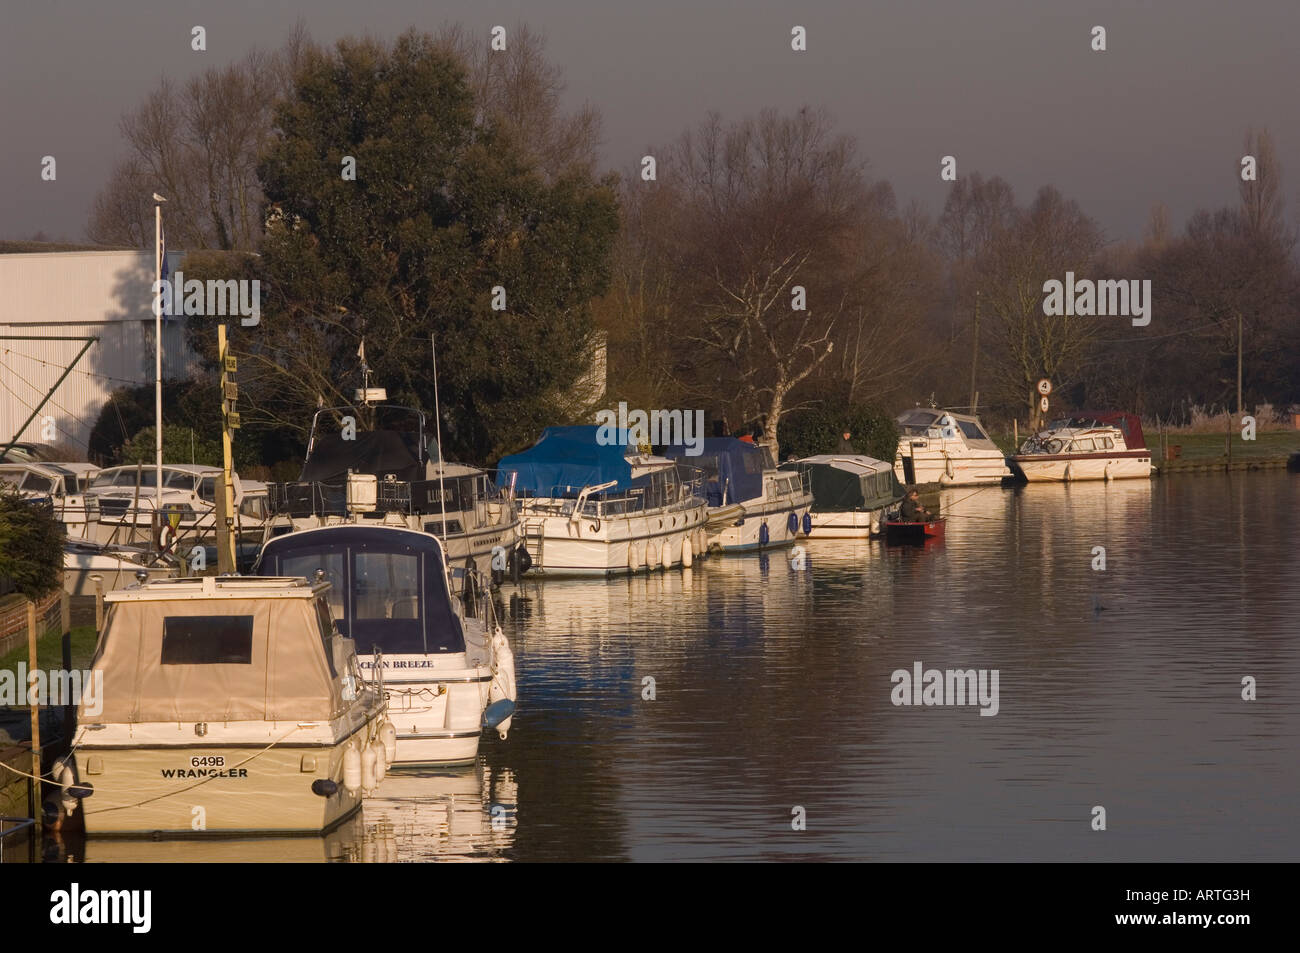 Boats On The River Waveney At Beccles In Winter in the uk Stock Photo